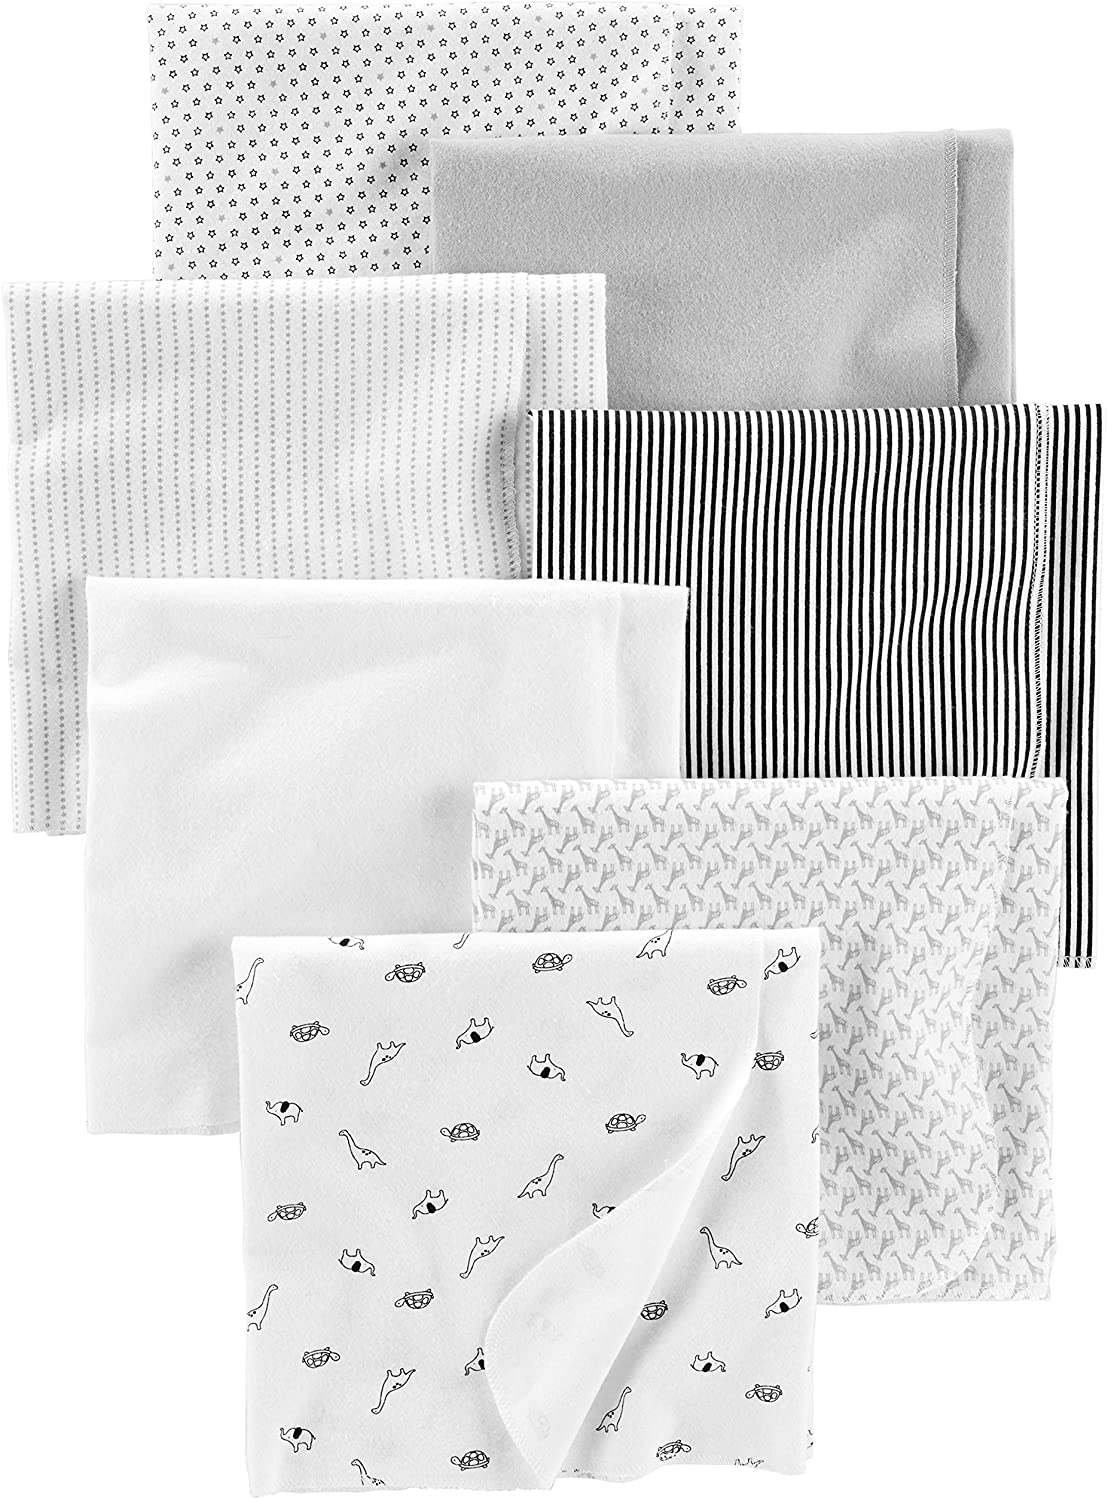 Simple Joys by Carter’s Unisex Kids’ Flannel Receiving Blankets, Pack of 7, Grey/White/Black, One Size